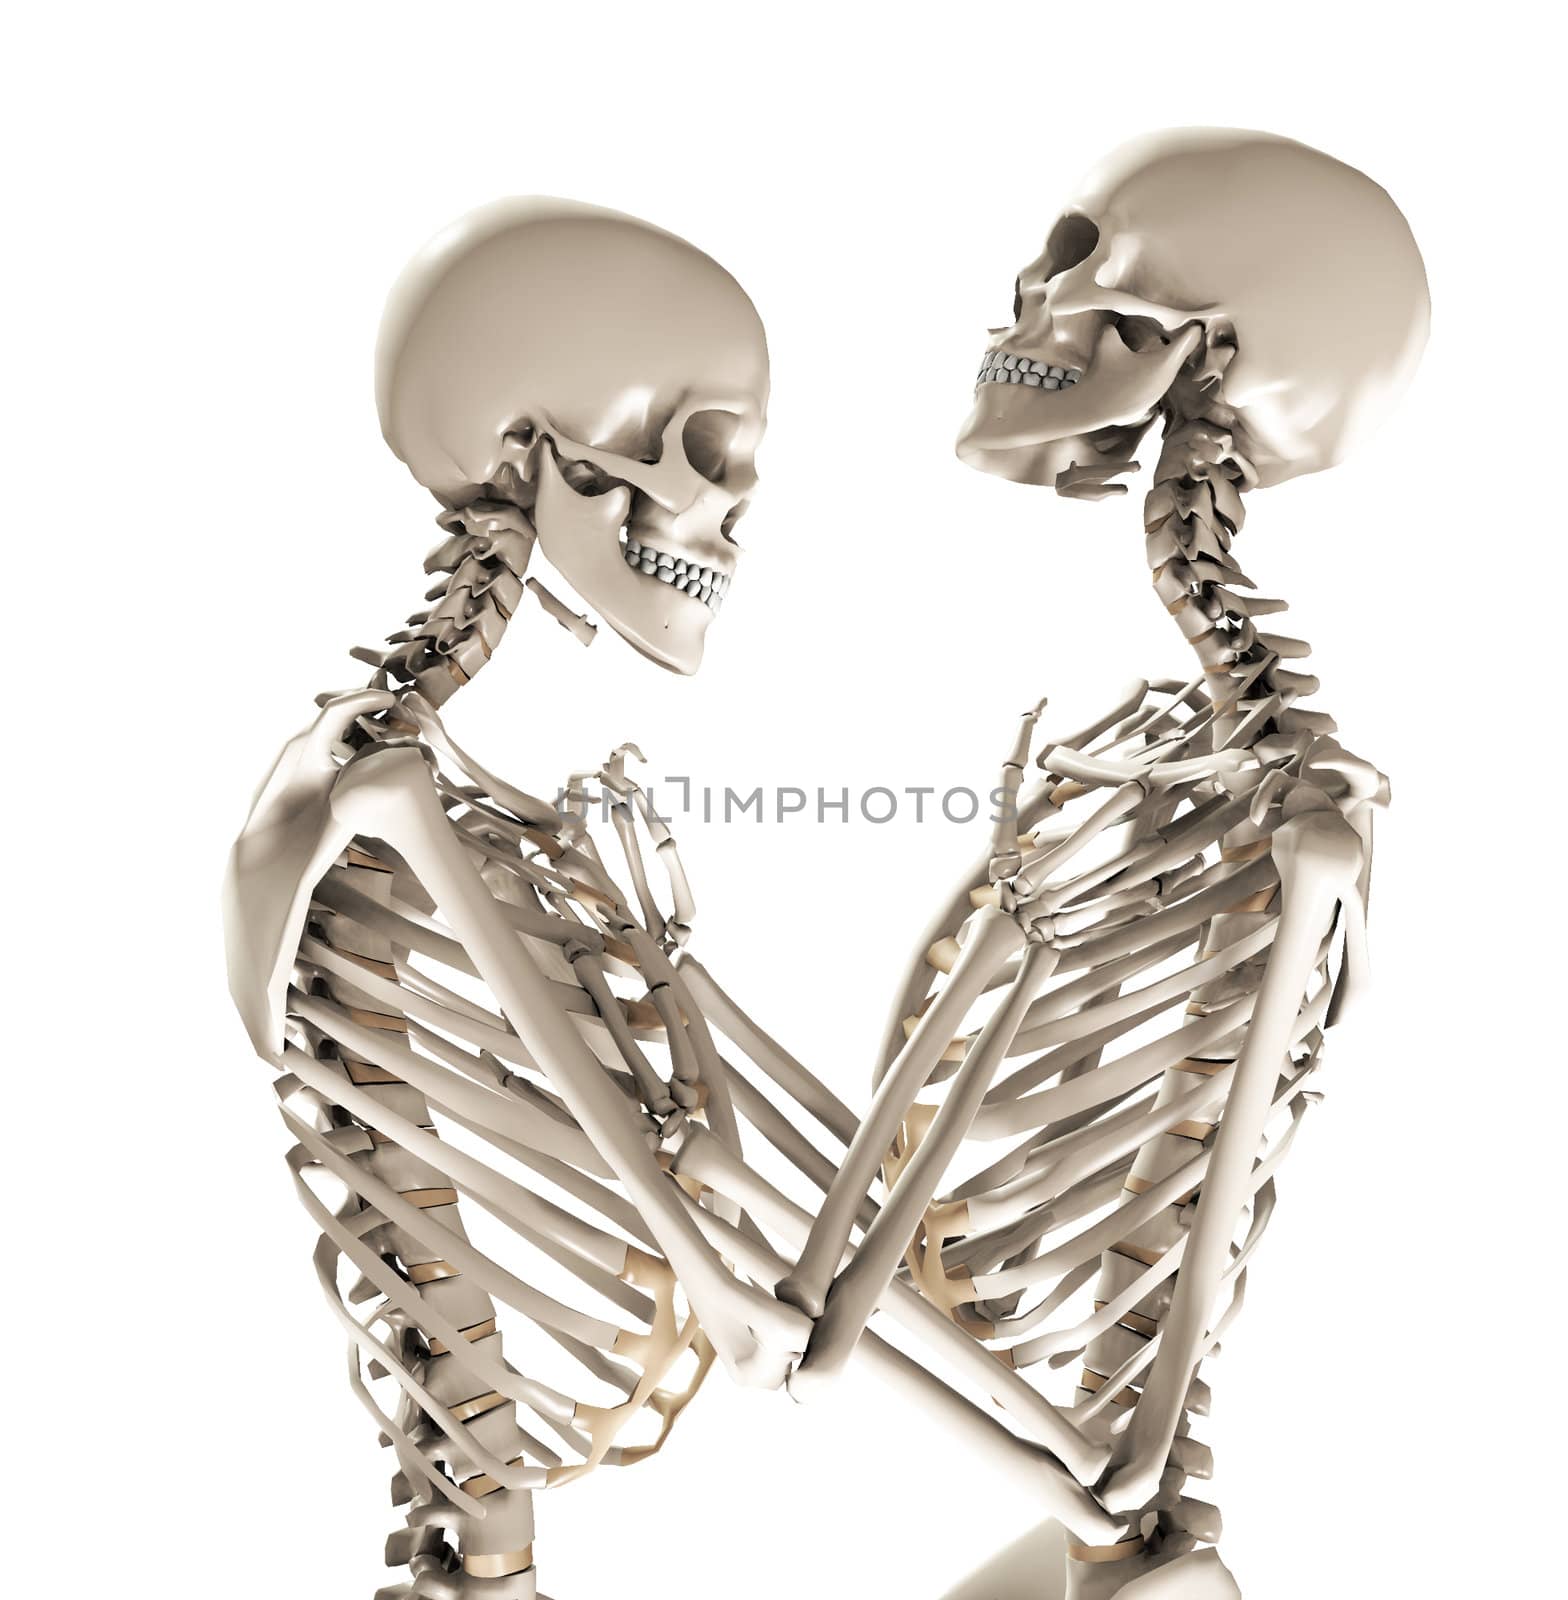 A pair of skeletons in a loving and tender pose.